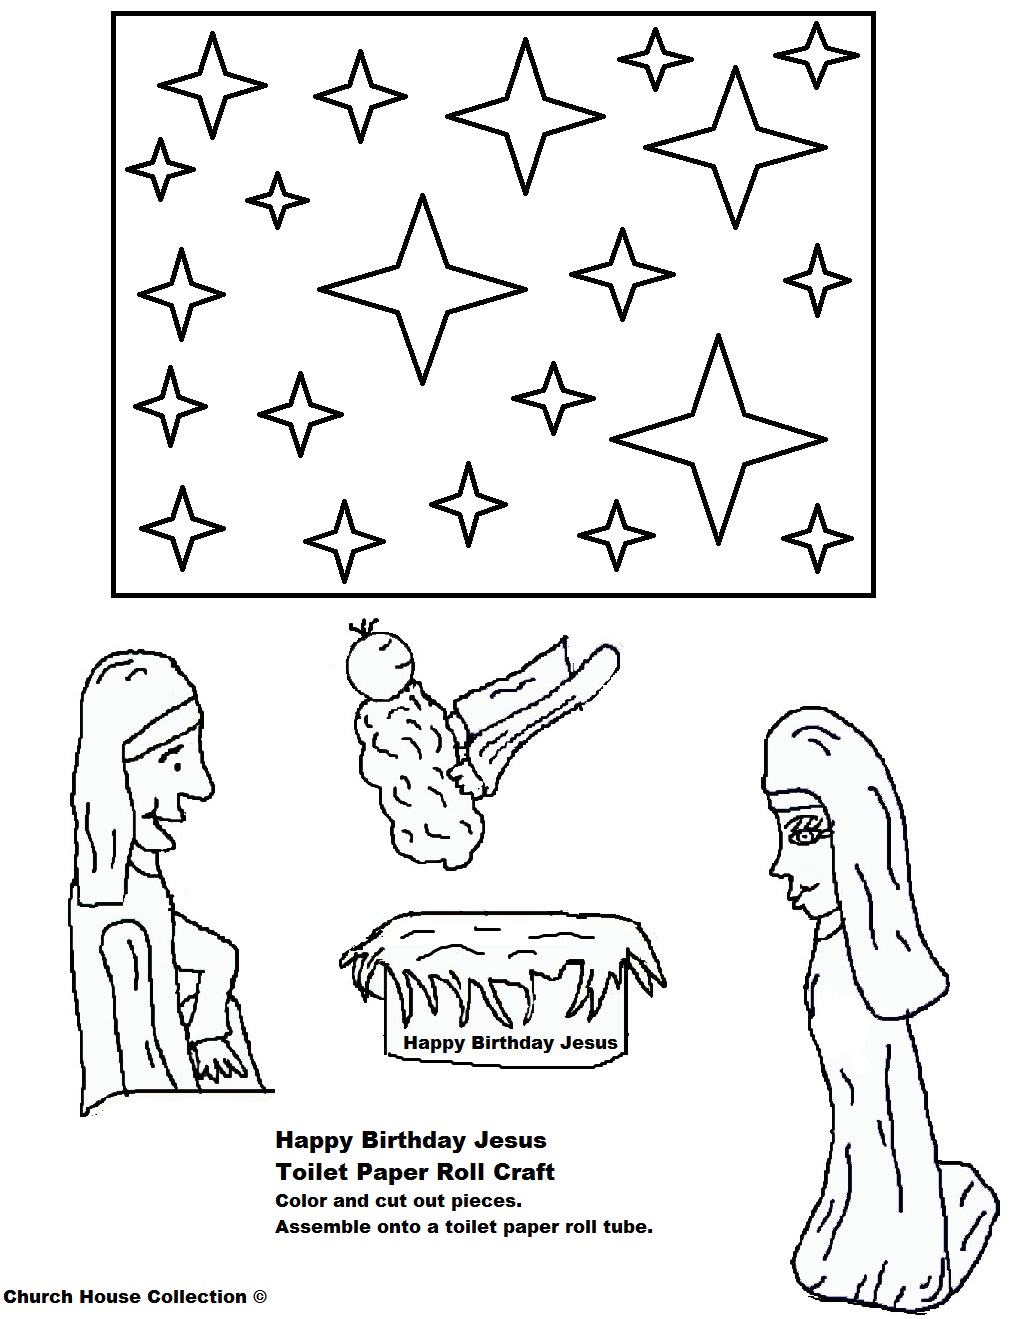 Happy Birthday Jesus Template Colored Black and white